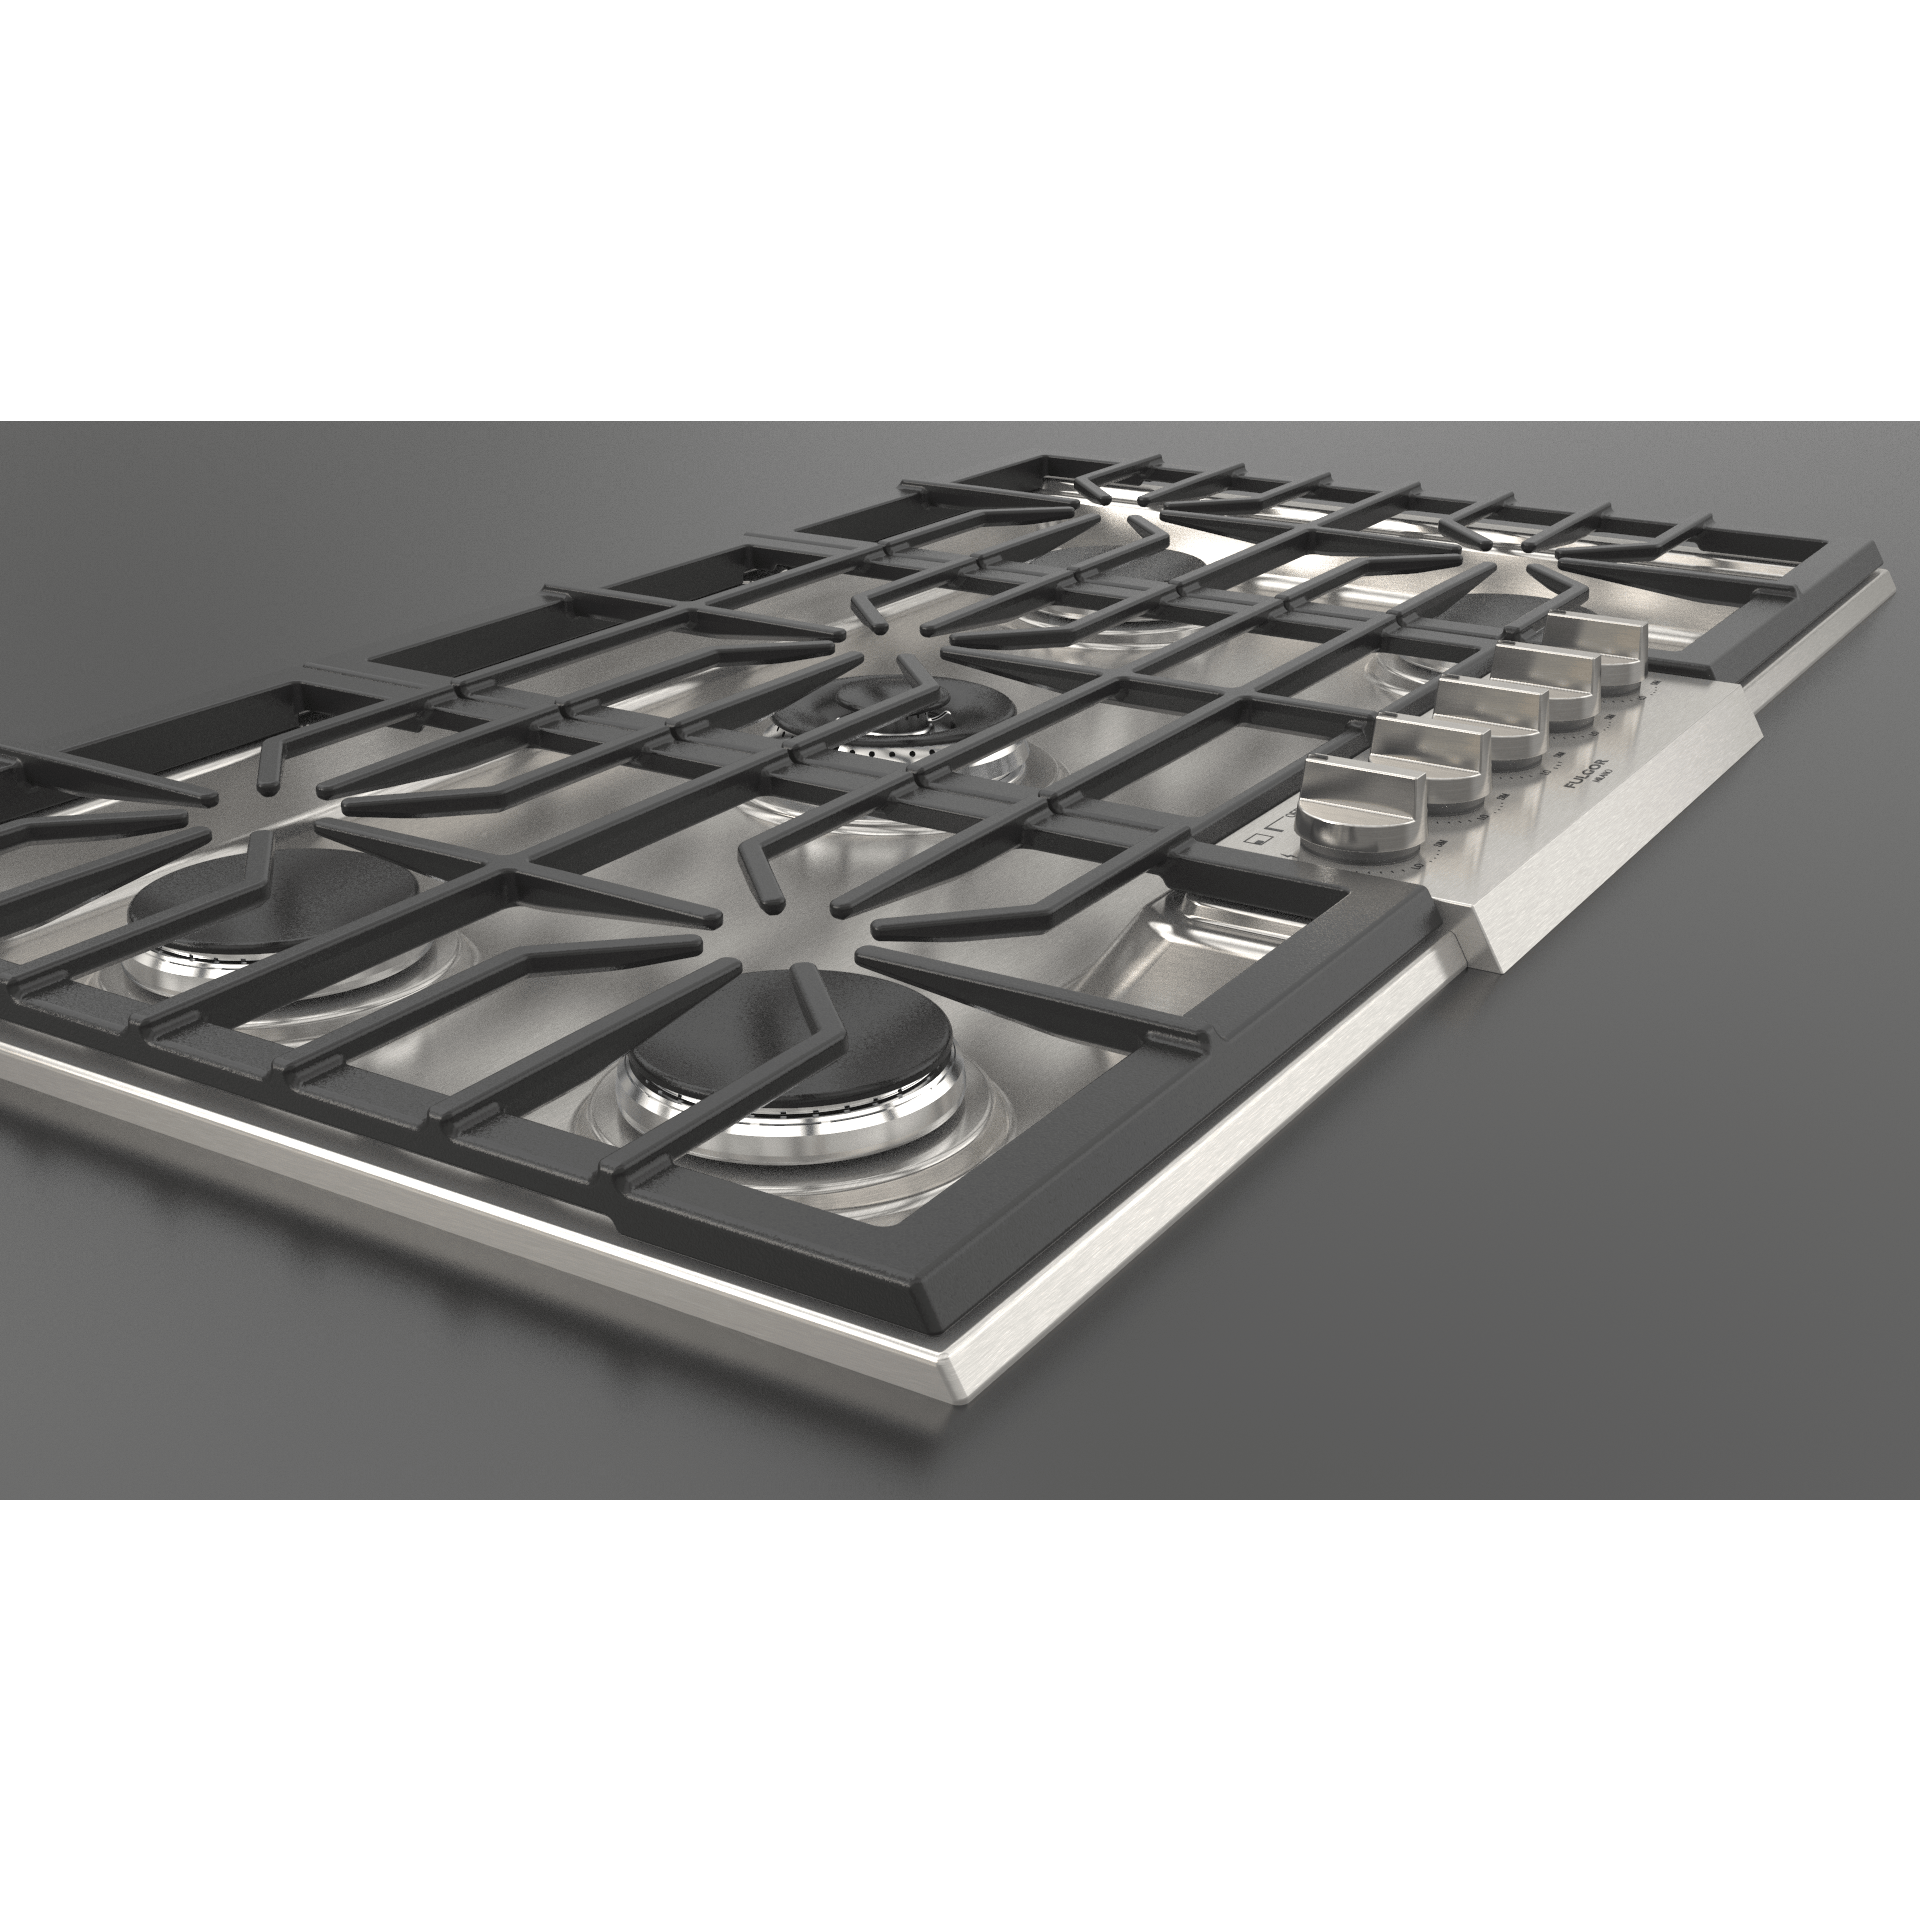 Fulgor Milano 36" Pro-Style Natural Gas Cooktop with 1 Central Dual Burner - F4PGK365S1 Cooktops F4PGK365S1 Luxury Appliances Direct